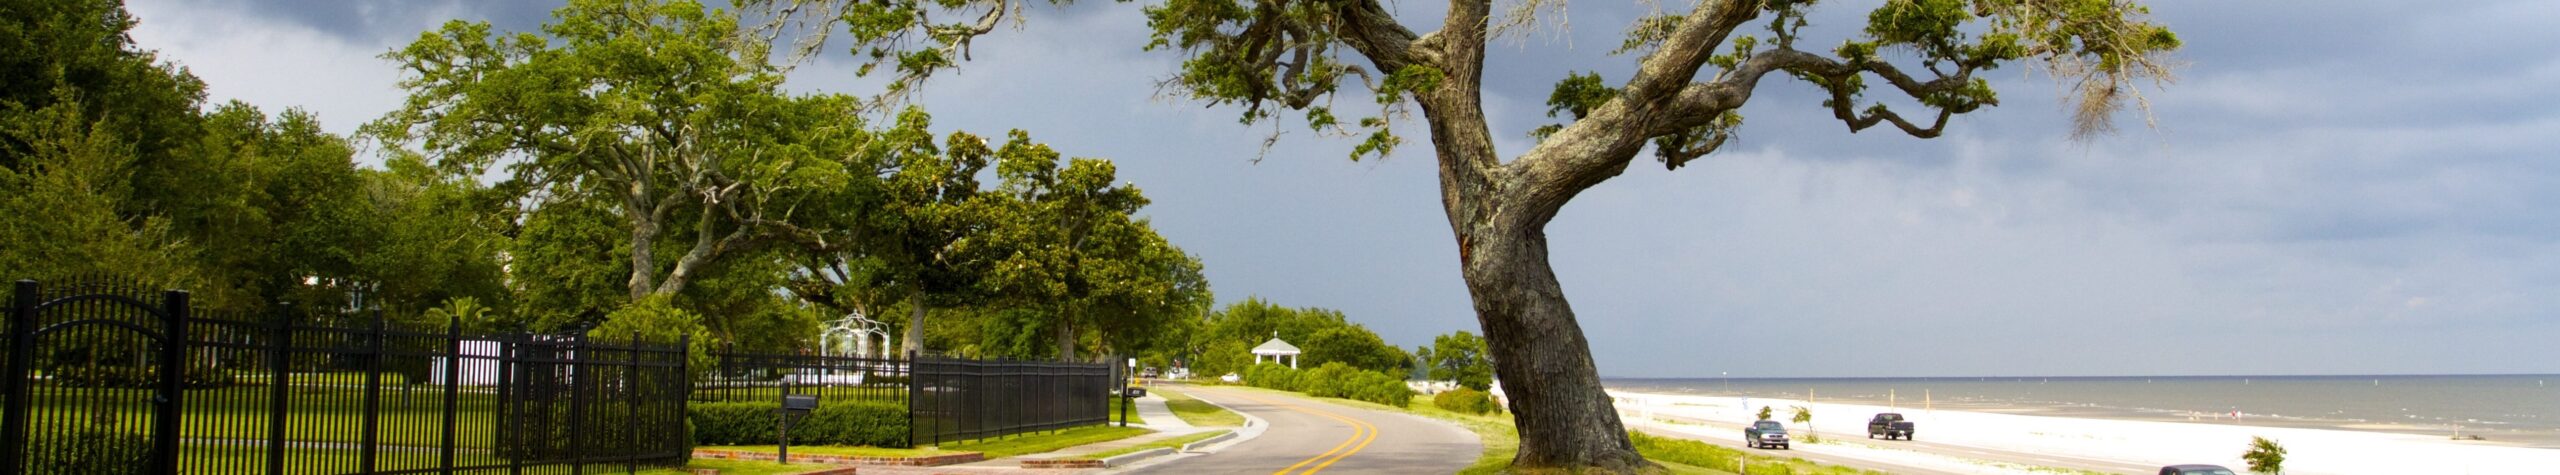 This is an image of a street next to a beach in Gulfport Mississippi. ASTA-USA provides professional translation services in this city.